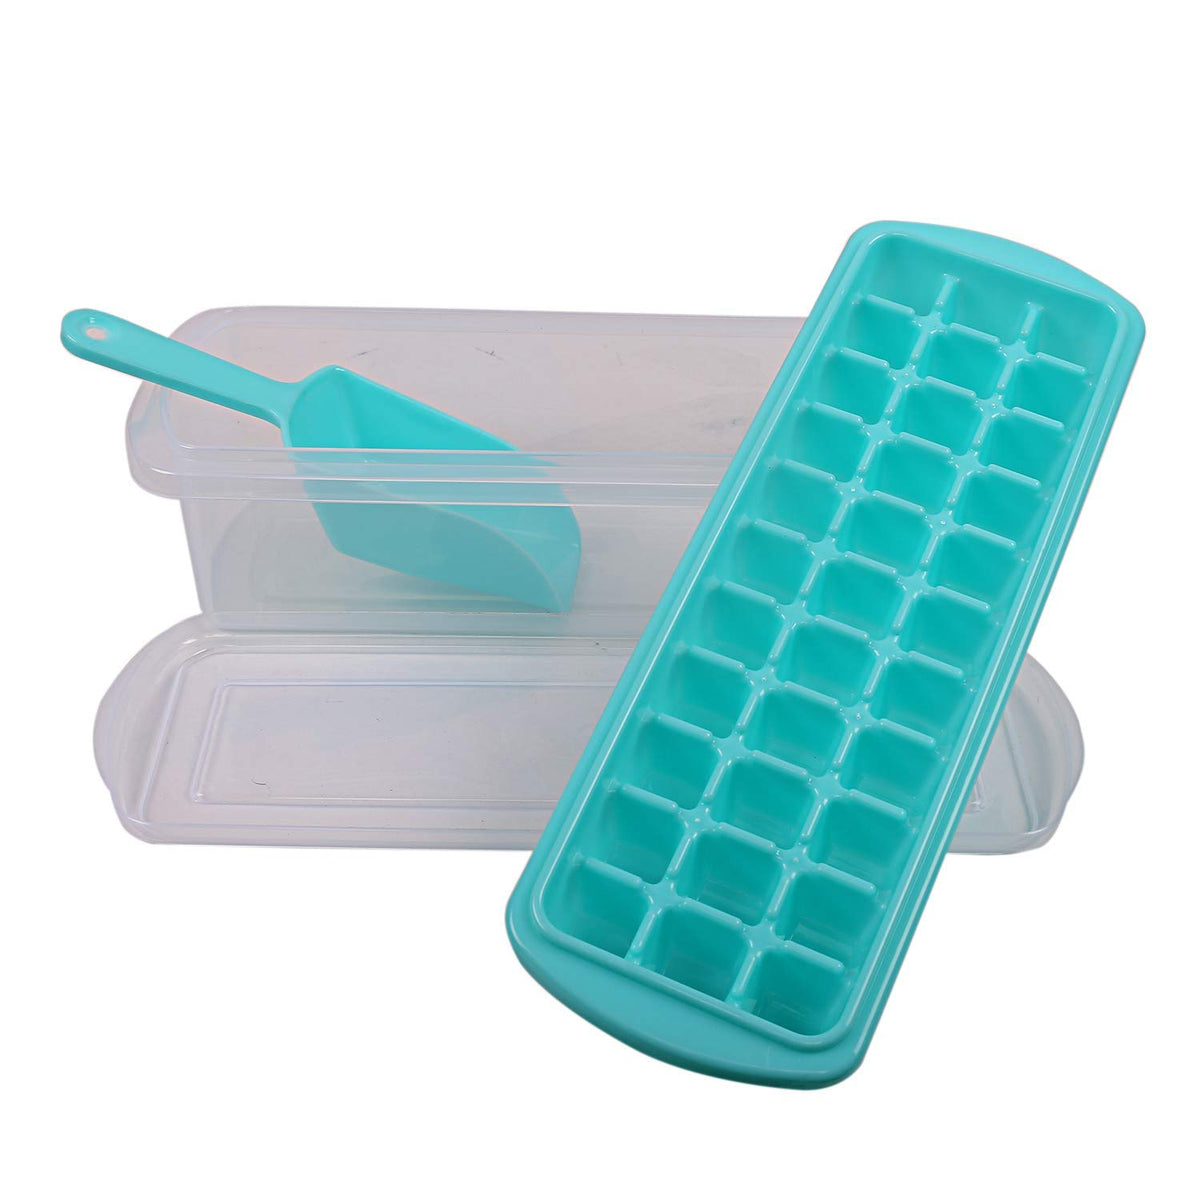 Kuber Industries Plastic Ice Tray with Storage Box, Spoon and Transparent Cover Lid, Random Colors (32 Cubes), Pack of 1-KUBMART2946